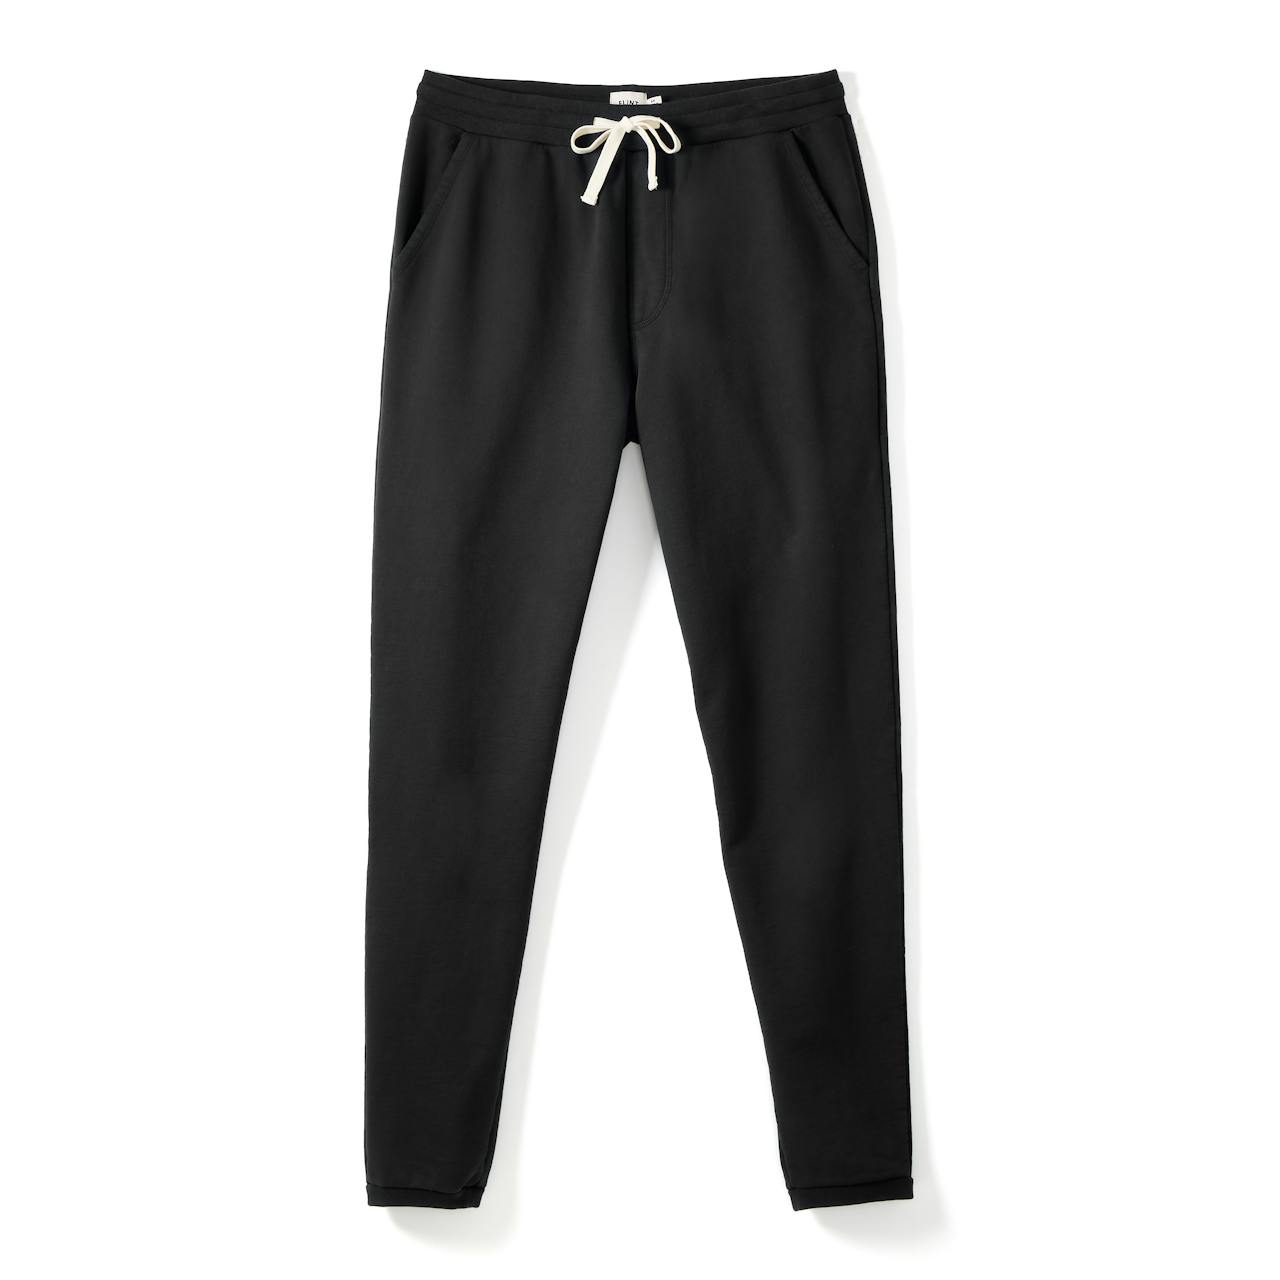 Flint and Tinder French Terry Sweatpants